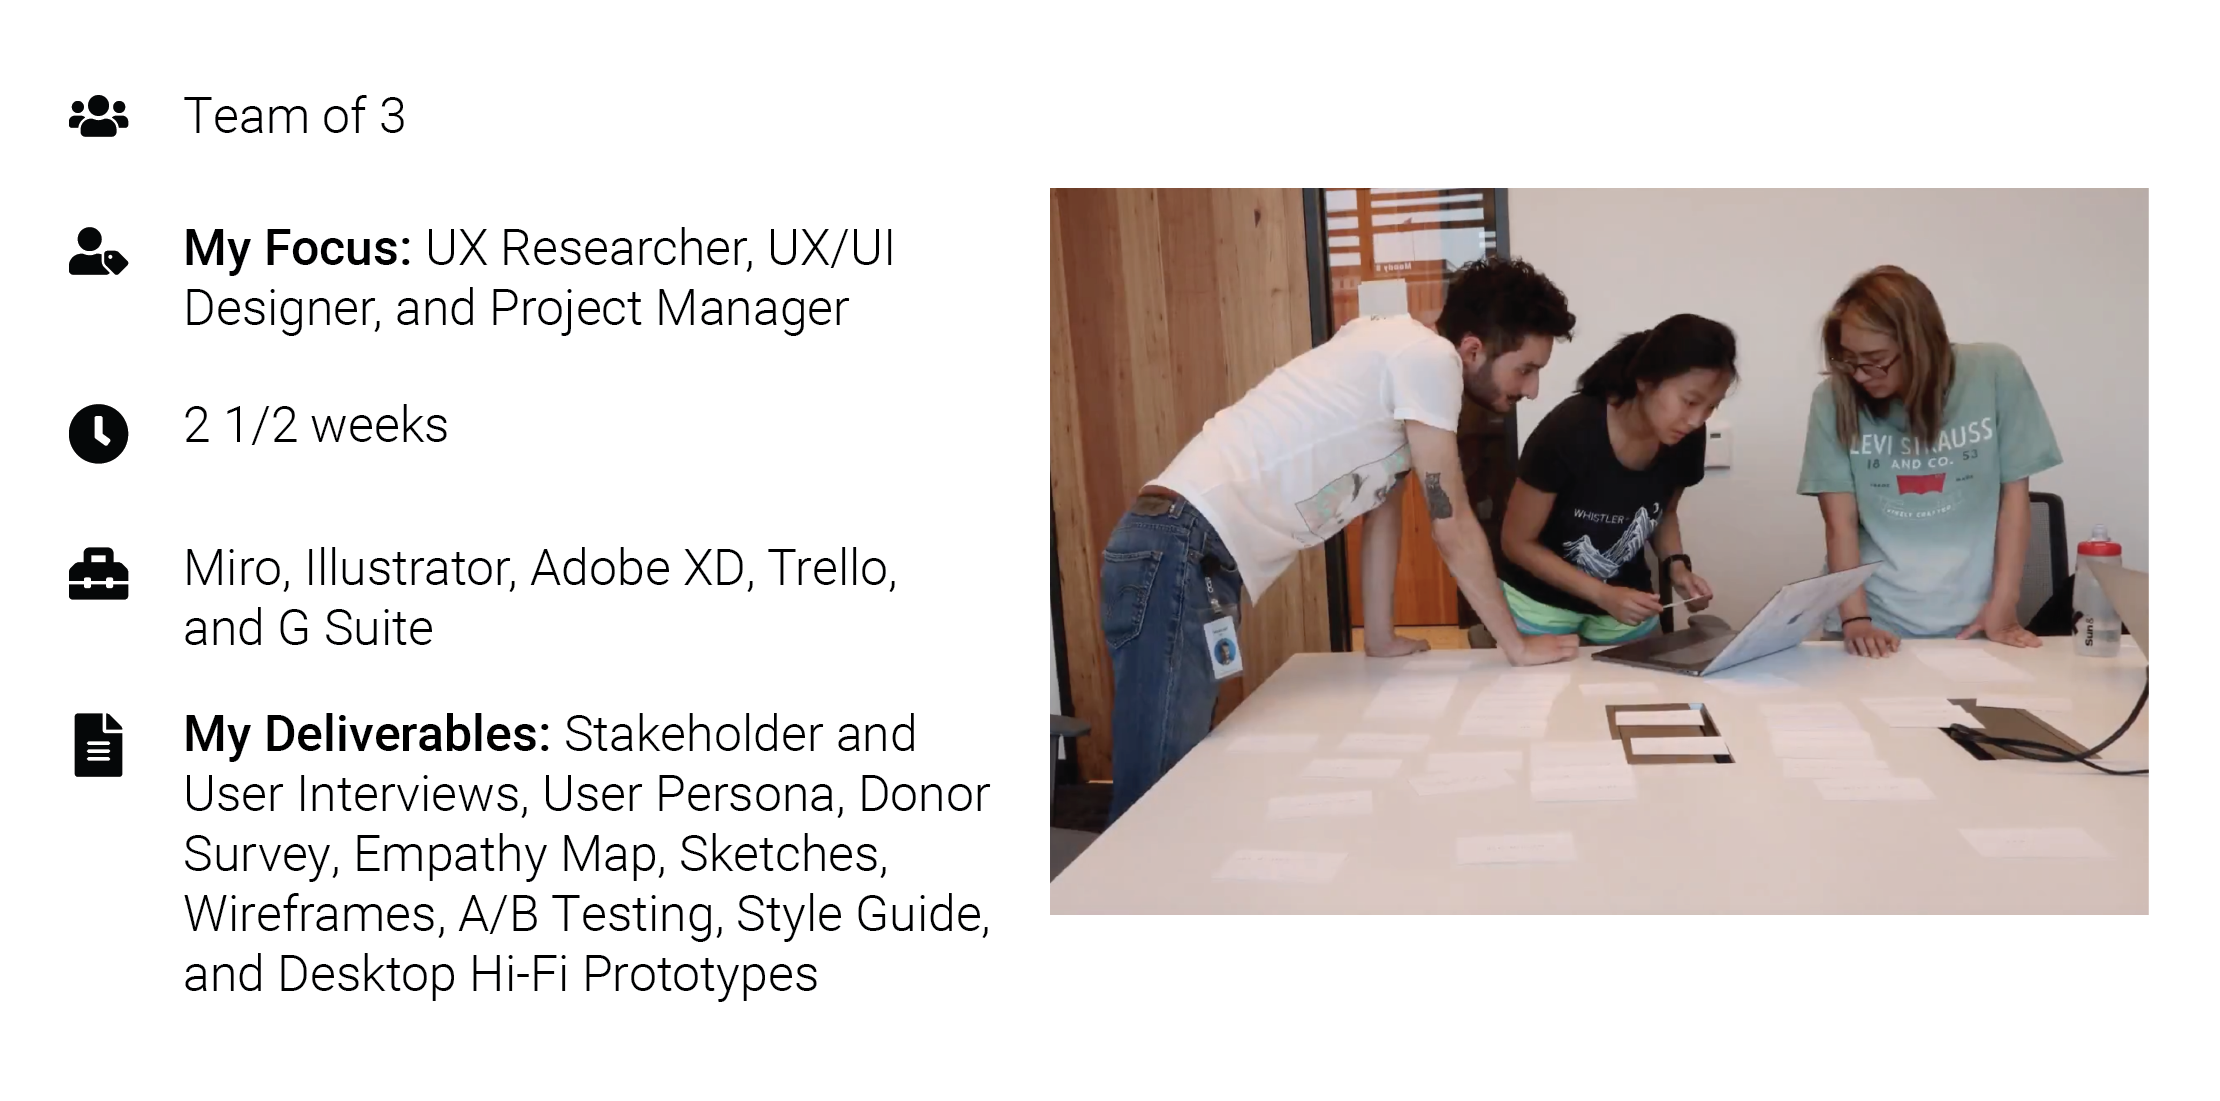 Scope: Team project where I focused as a UX Researcher, UI Designer, and Project Manager. This project took place over the span of 2 1/2 weeks.